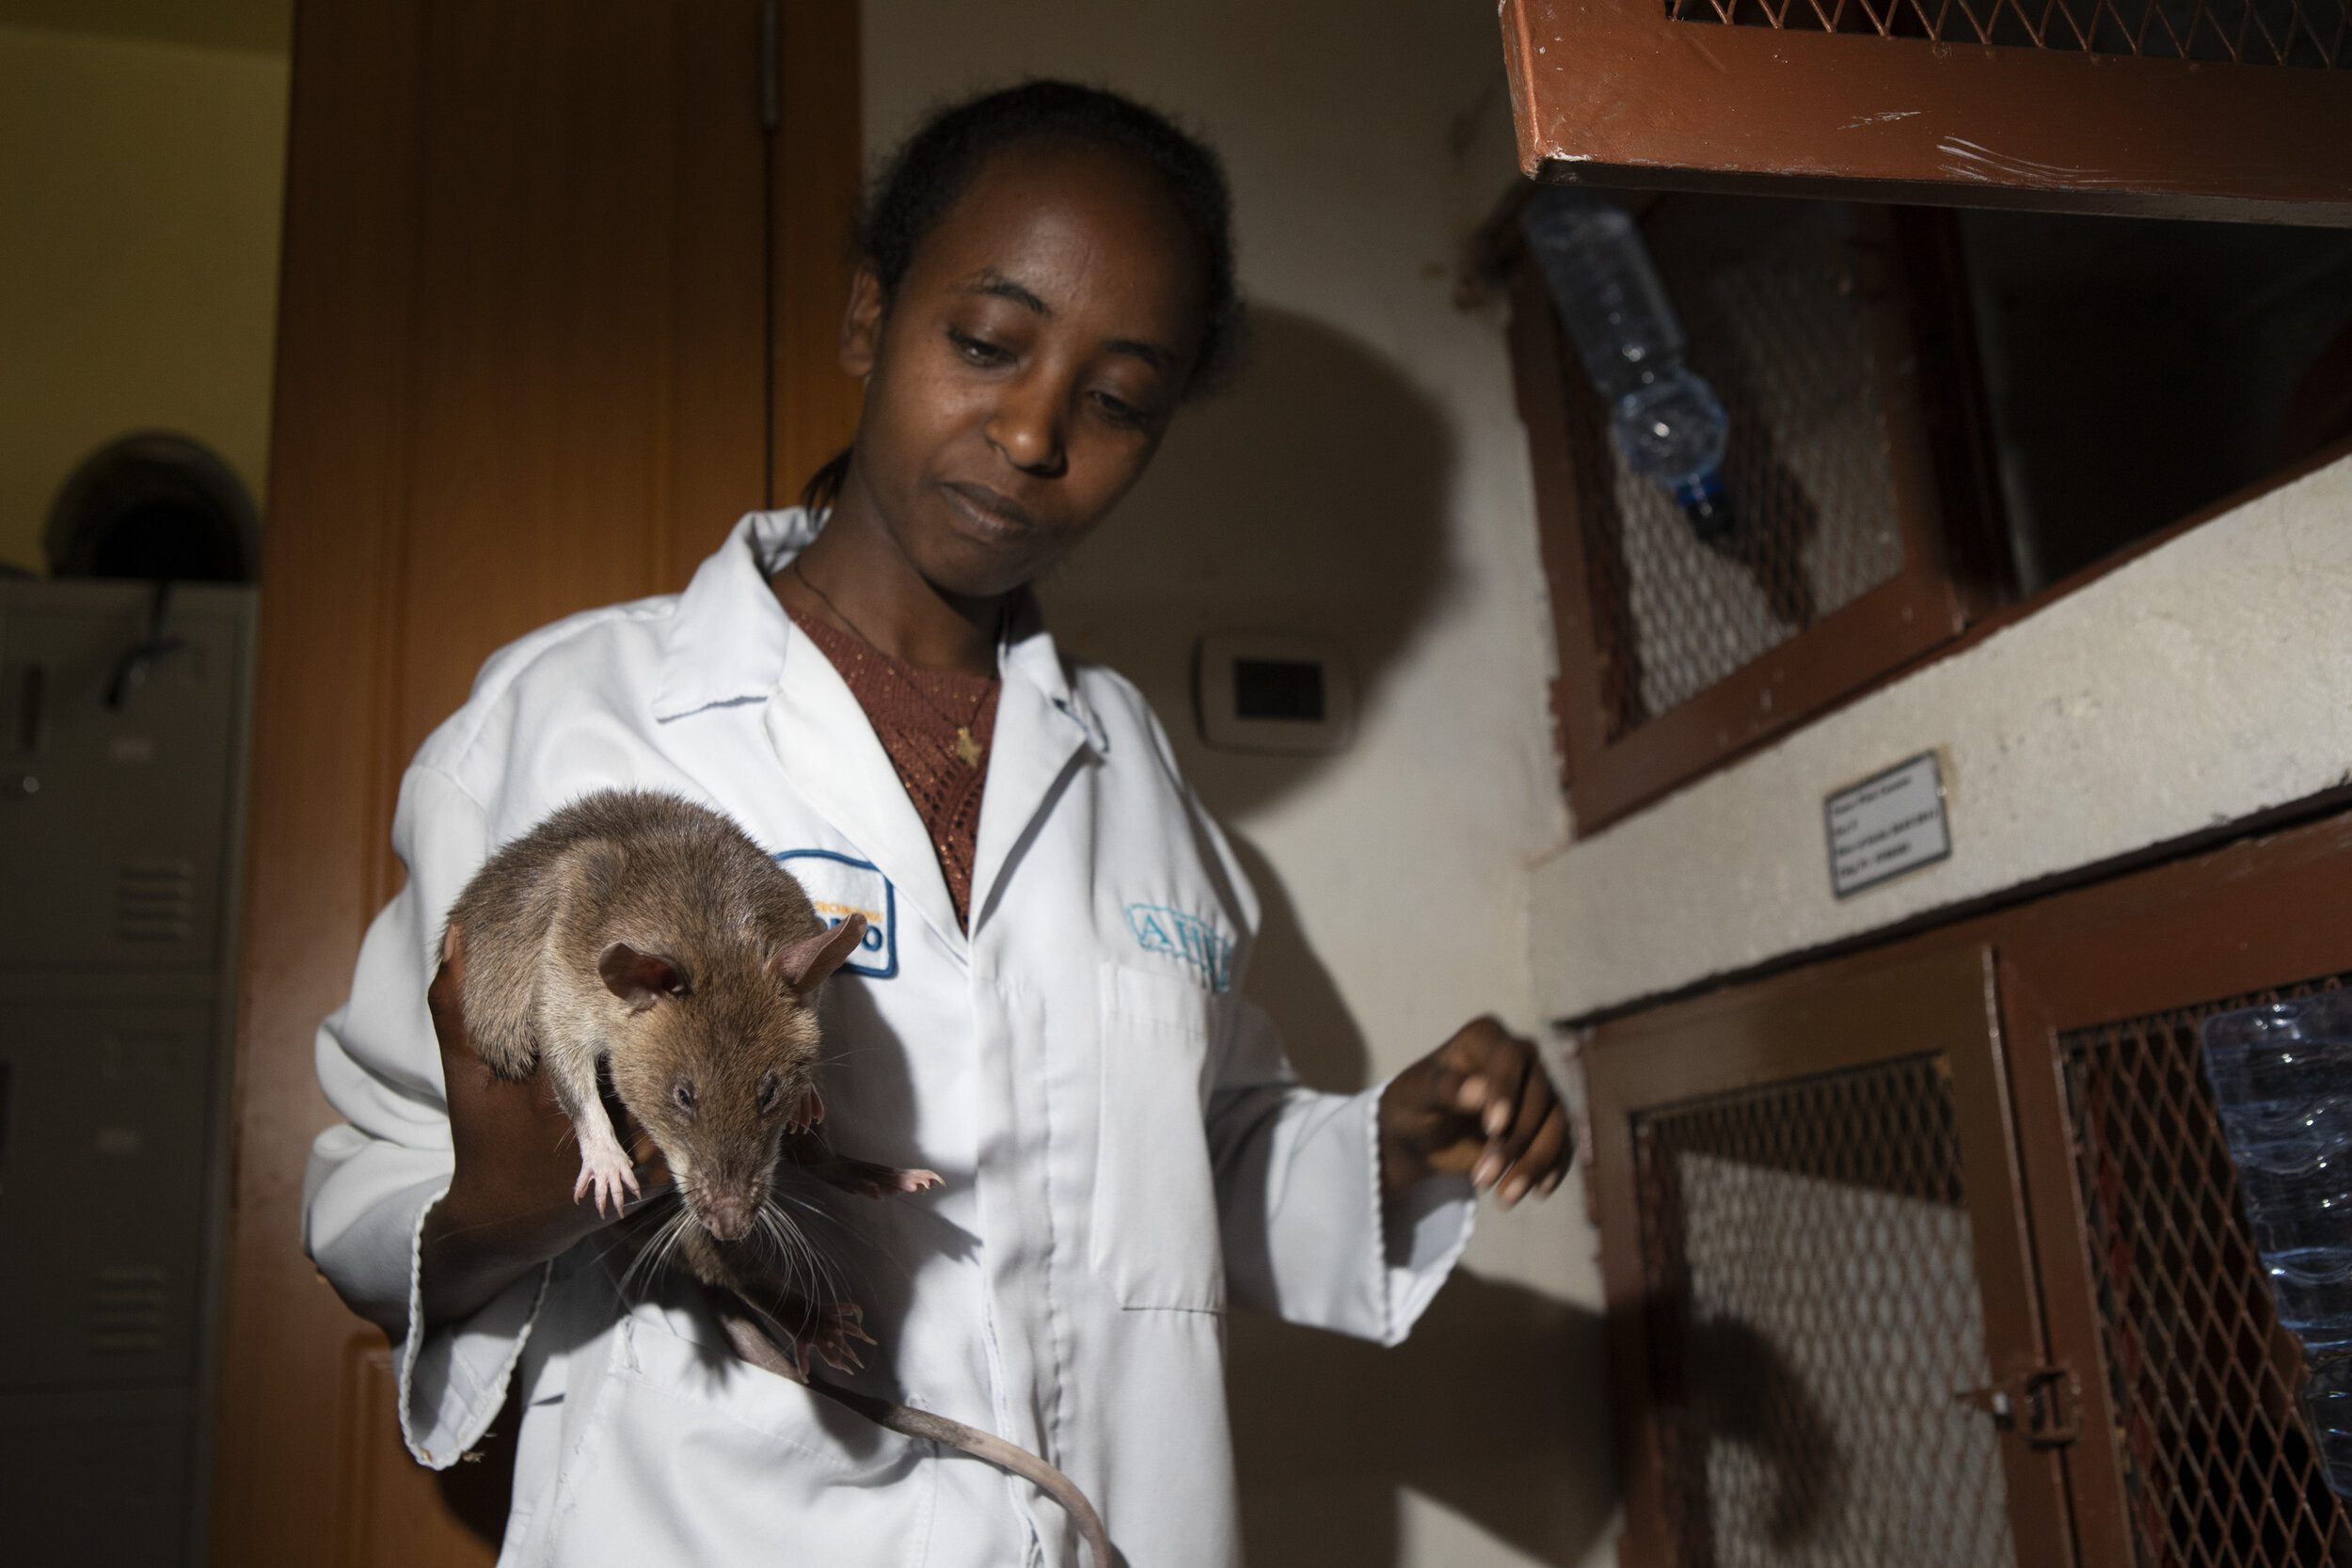  From a story in Der Spiegel, on TB sniffing rats in Ethiopia. 